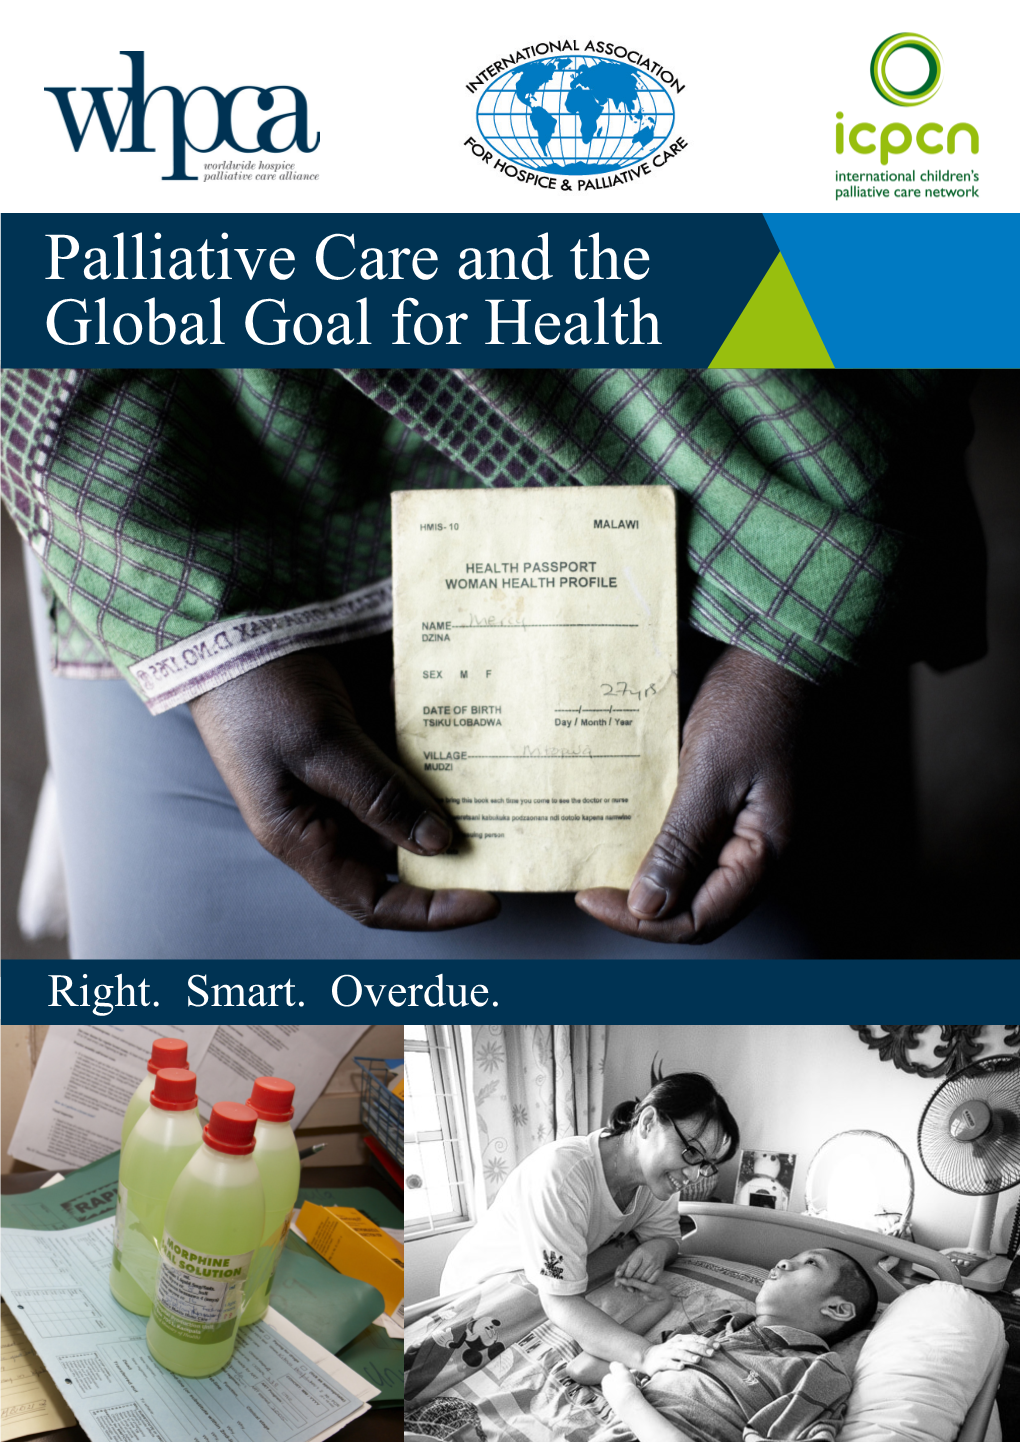 Palliative Care and the Global Goal for Health